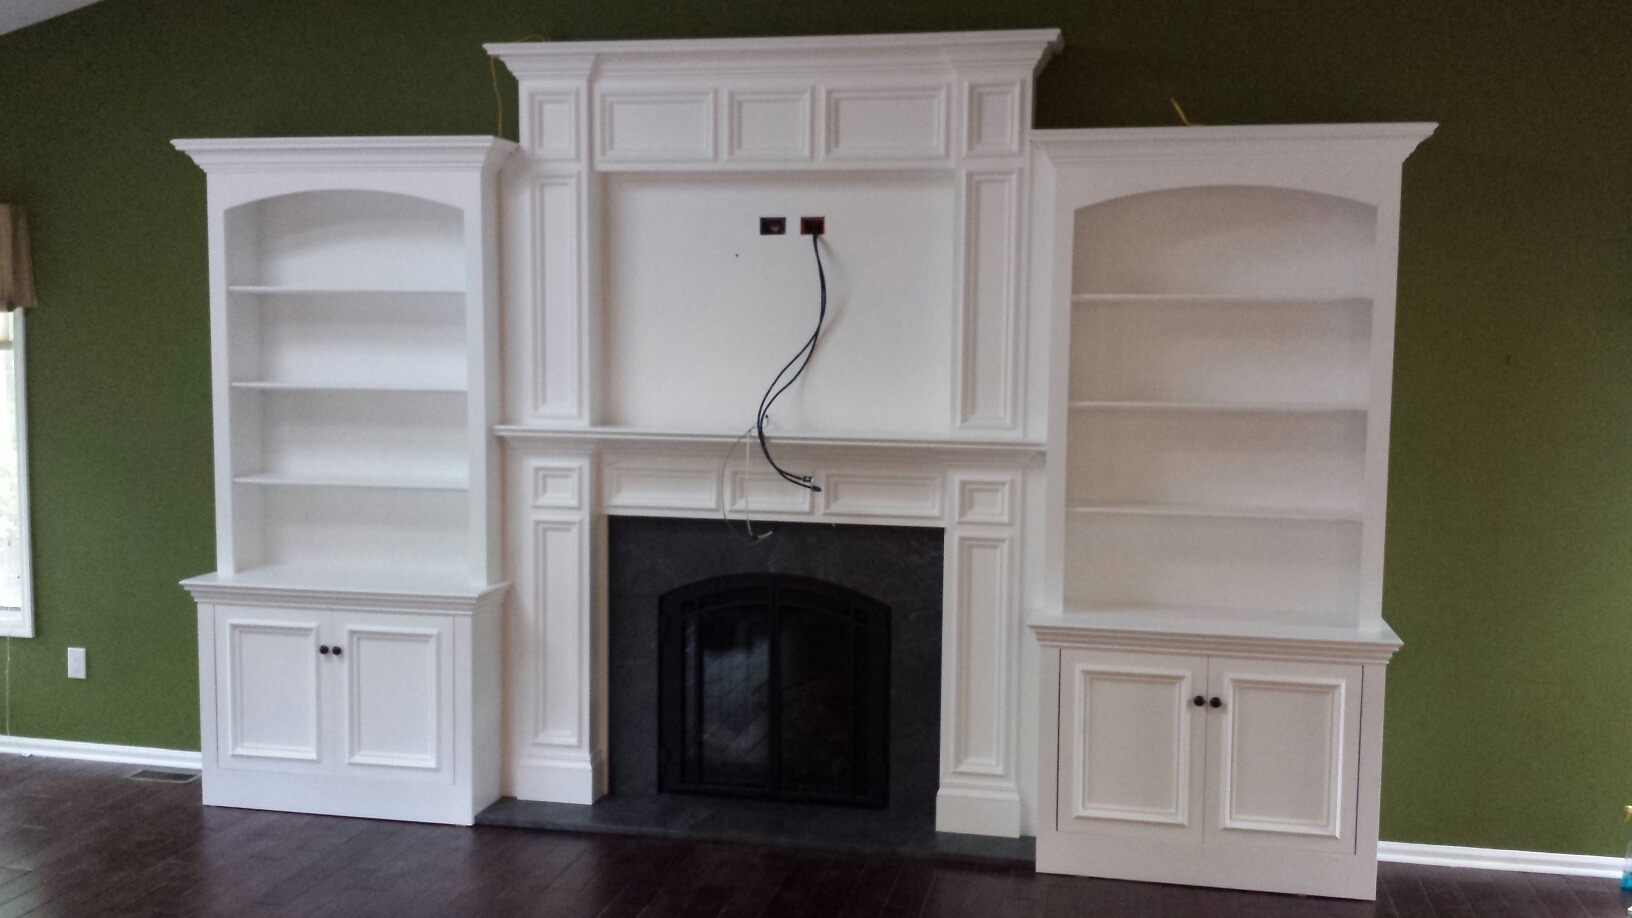 Gas Fireplace w/ built-in bookcases